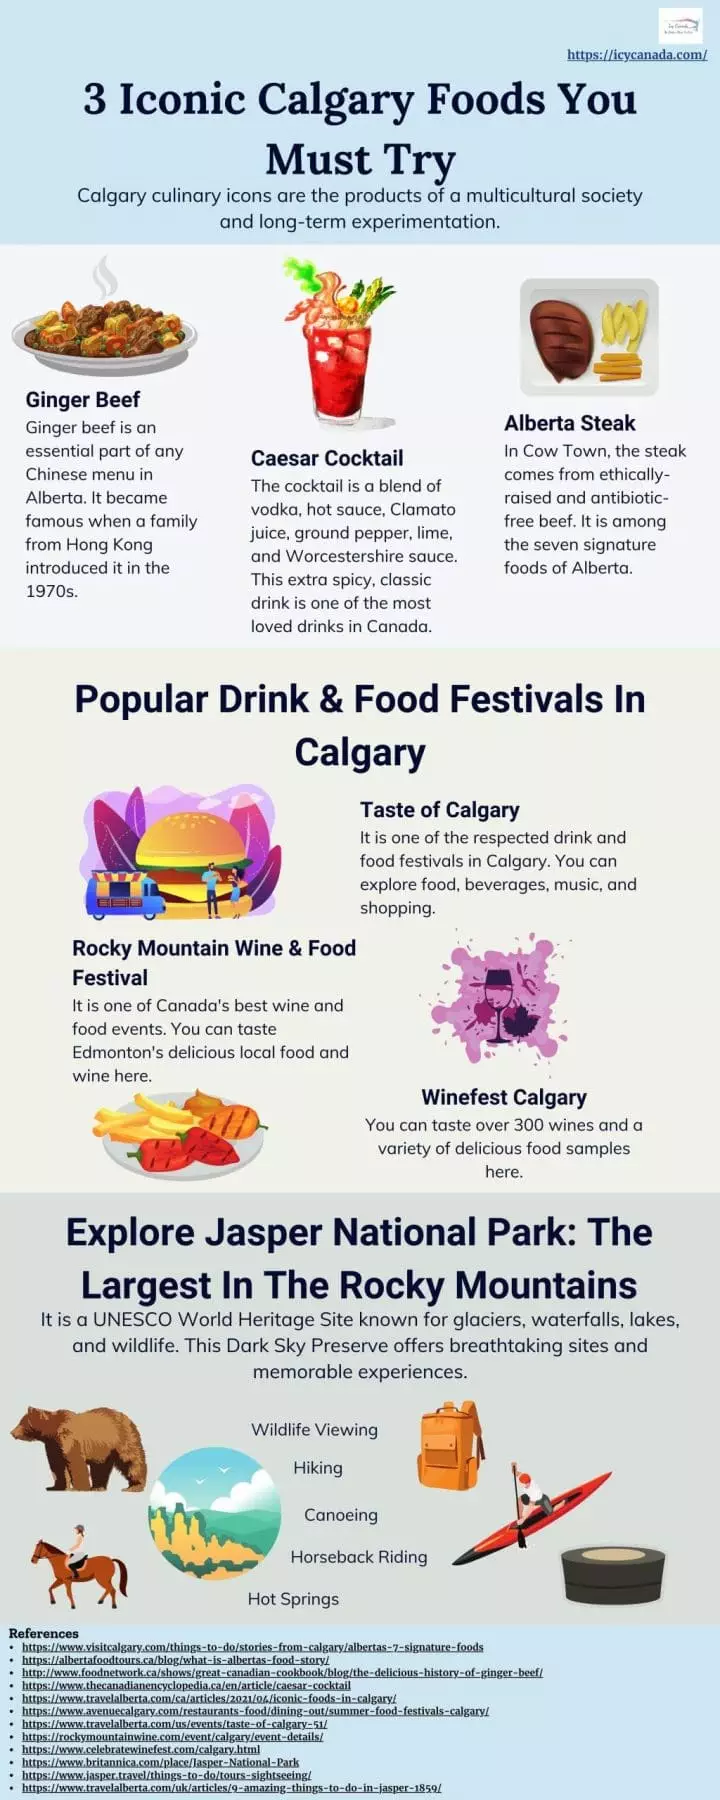 Infographic that presents the fabulous food of Calgary and exciting Jasper National Park attractions